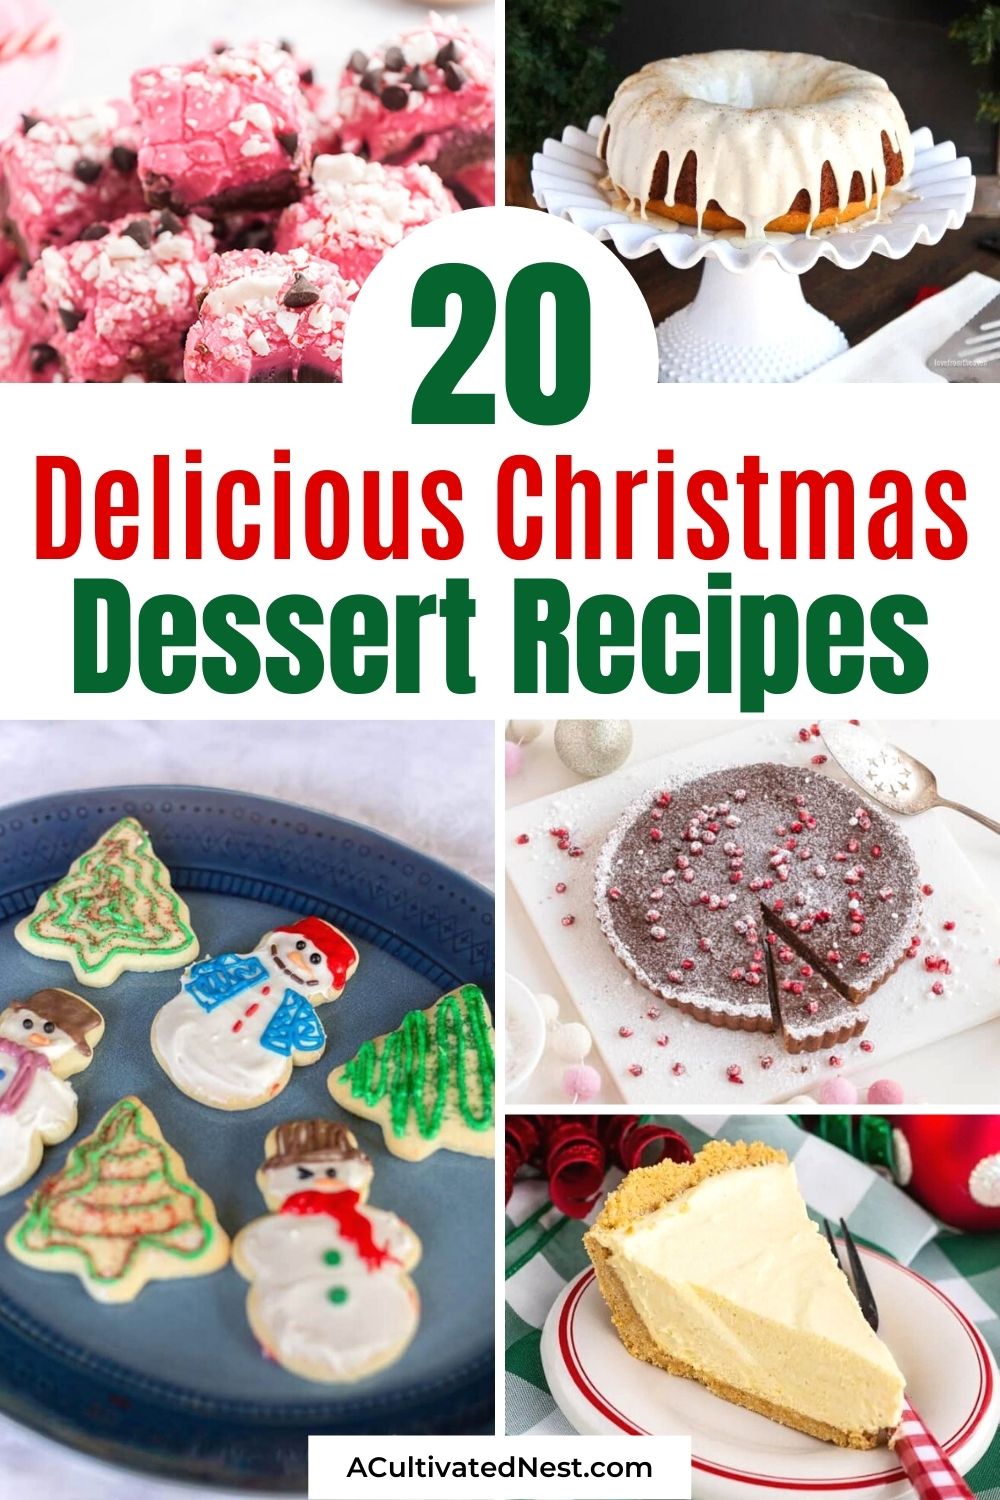 20 Delicious Christmas Dessert Recipes- Serve your family and friends some extra special treats this holiday season, by baking up some of these tasty Christmas dessert recipes! There are so many to choose from! | Christmas baking recipes, Christmas food, Christmas recipes, #dessertRecipes #desserts #recipes #ChristmasFood #ACultivatedNest